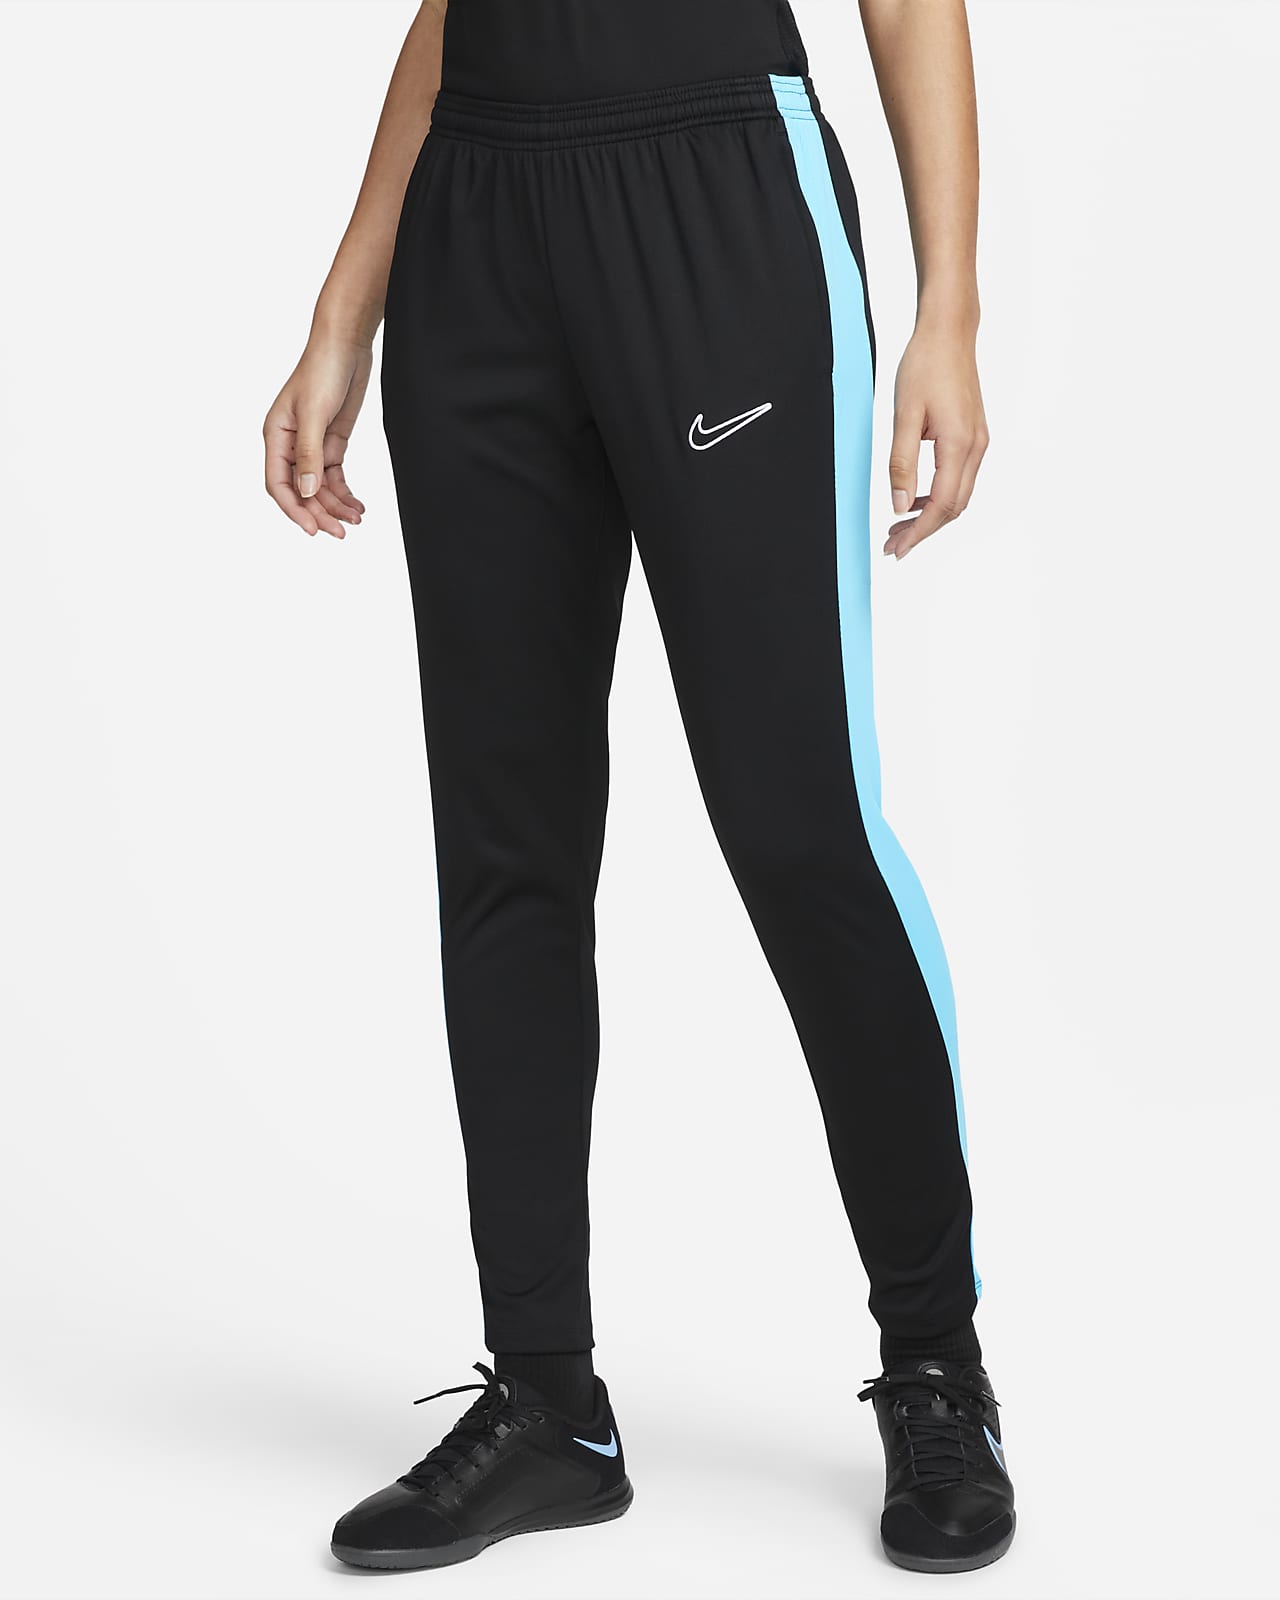 Nike Dri-FIT Academy Pants. IN